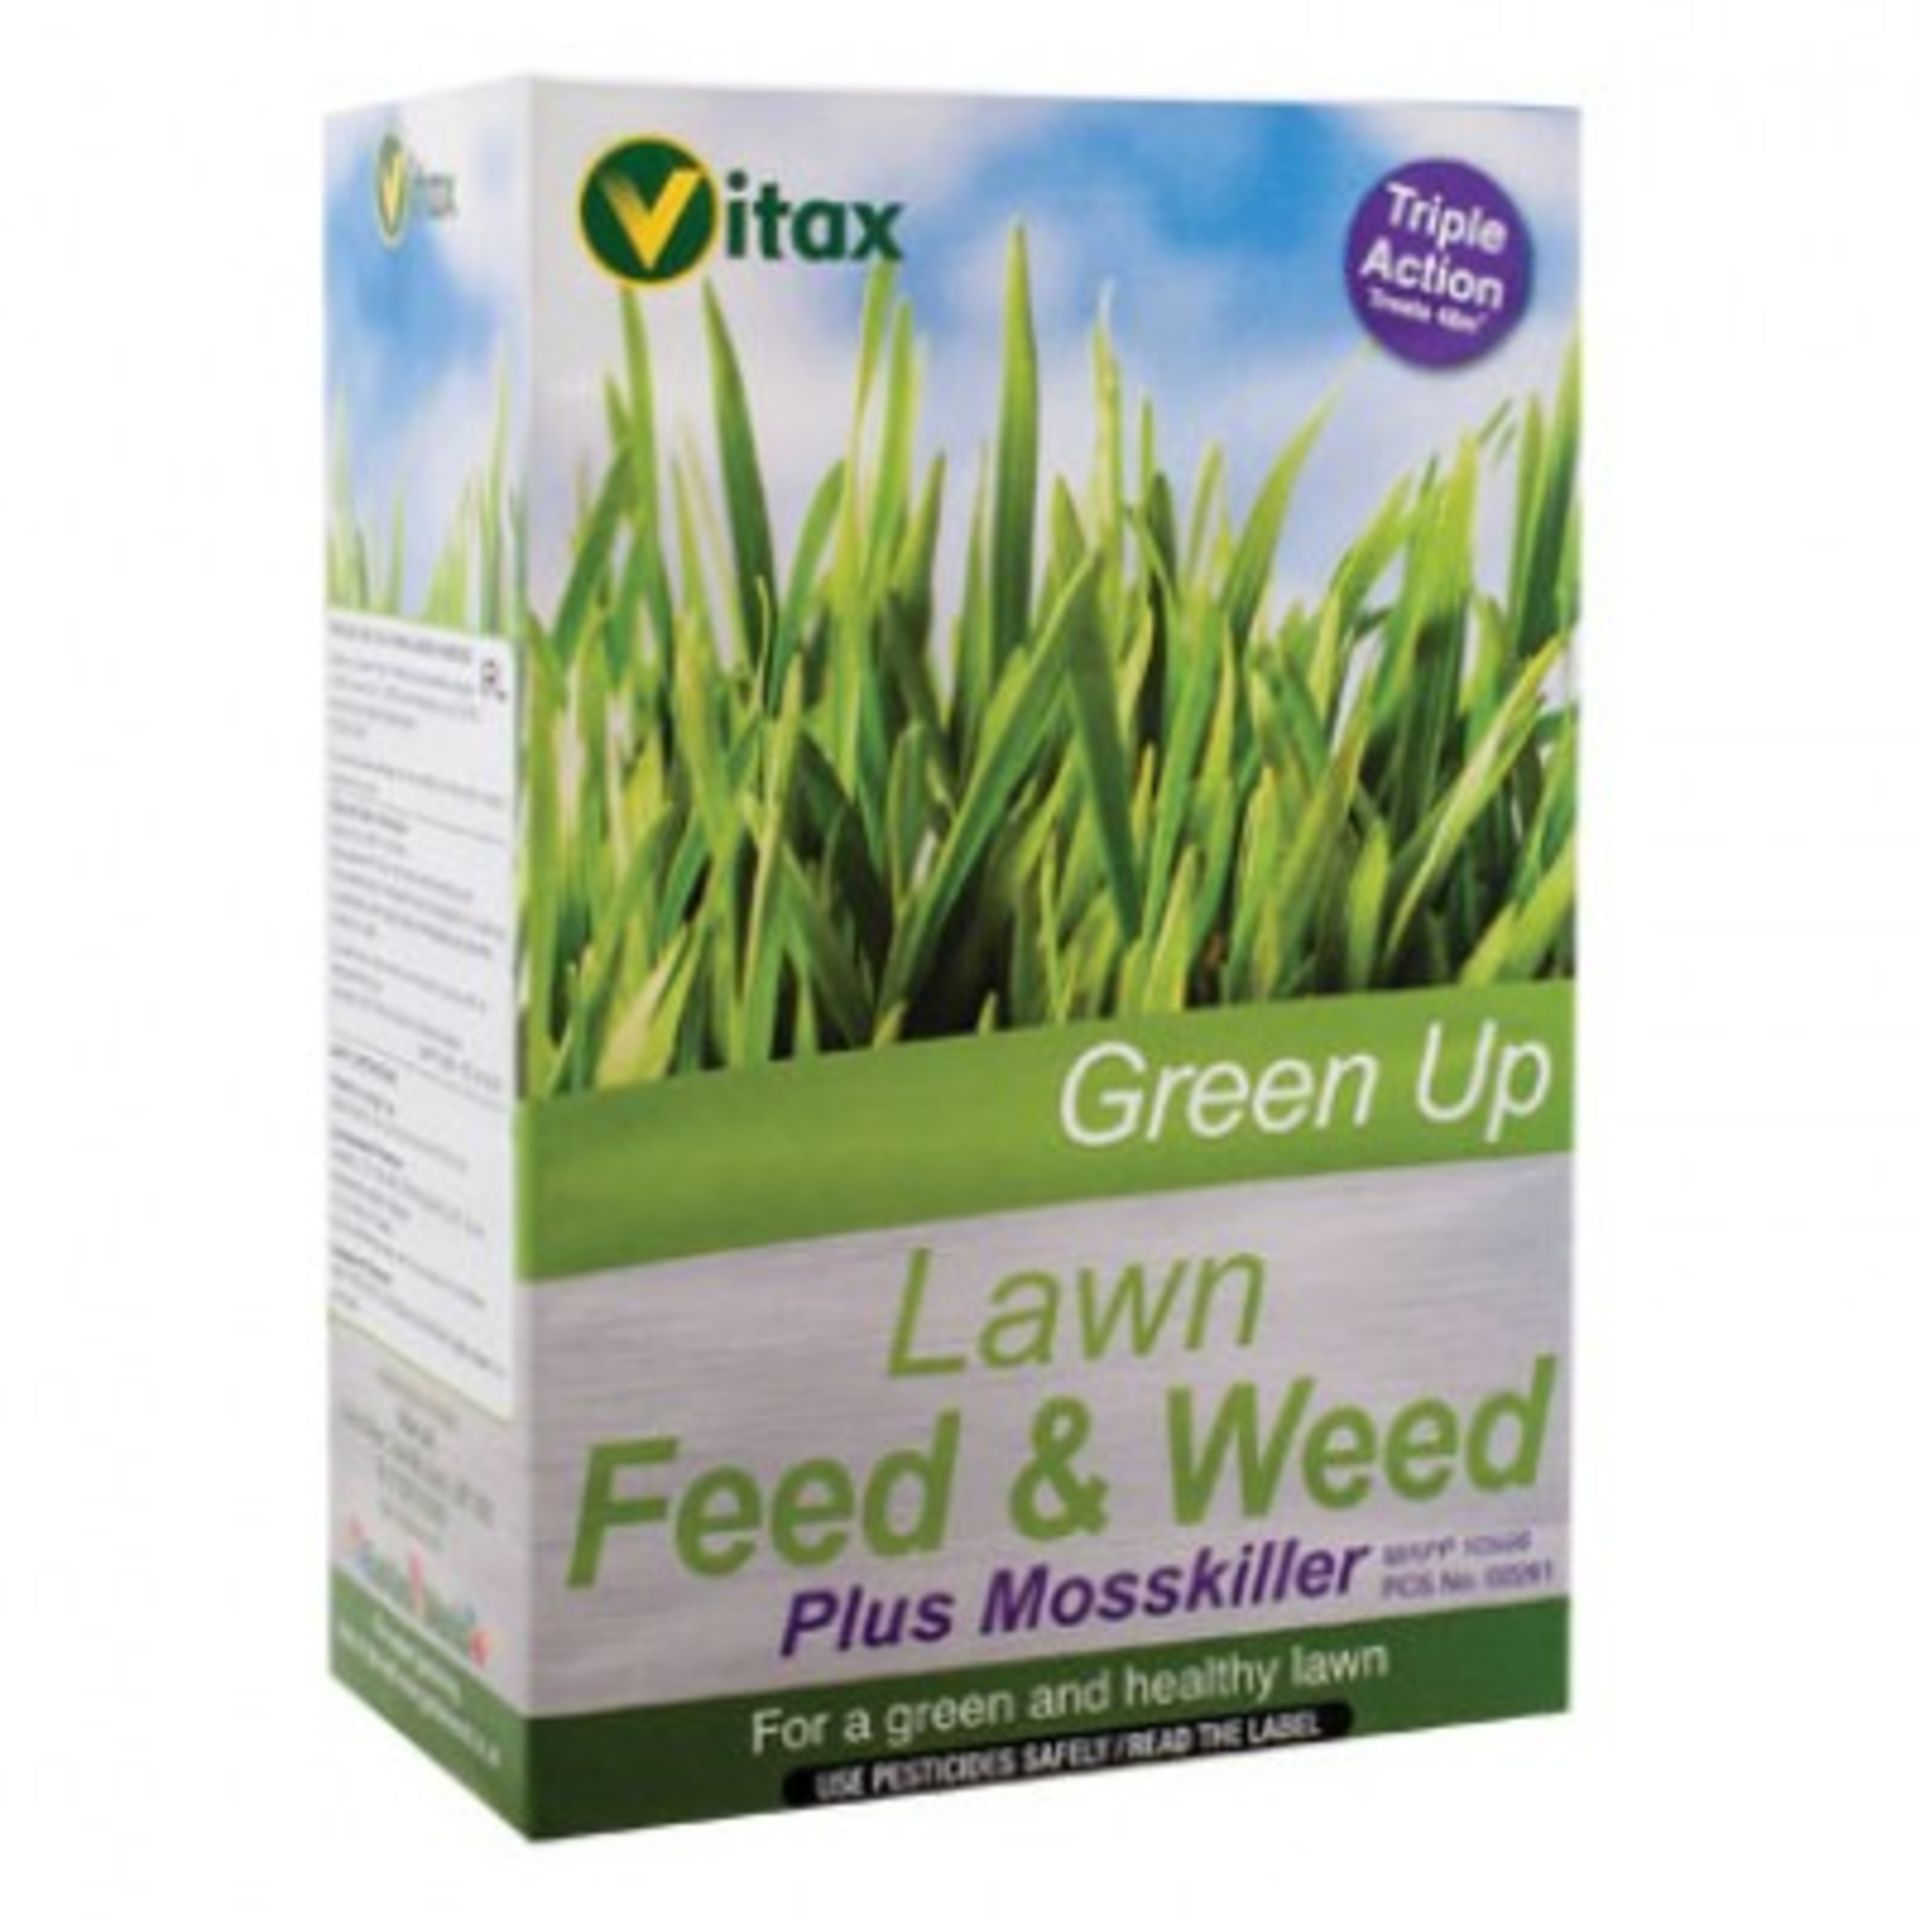 V Brand New Five 3kg Boxes Vitax Green Up Lawn Feed & Weed Plus Moss Killer ISP £13.99 (Tesco